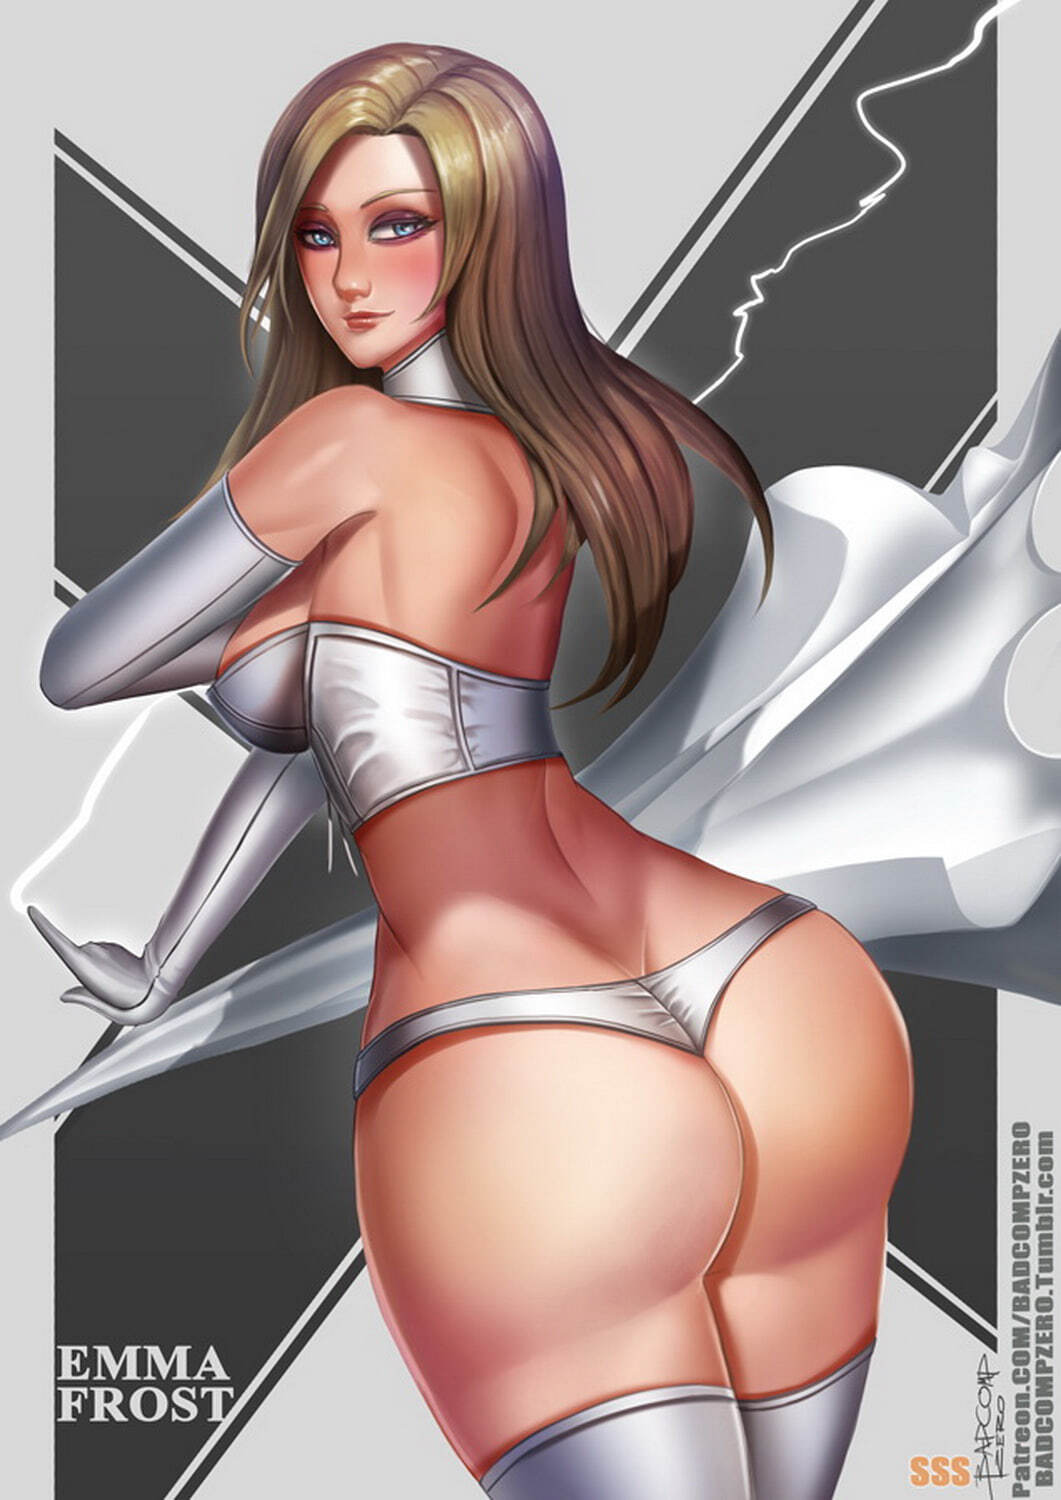 White Queen and Emma Frost Blonde Female Only Solo Superheroine